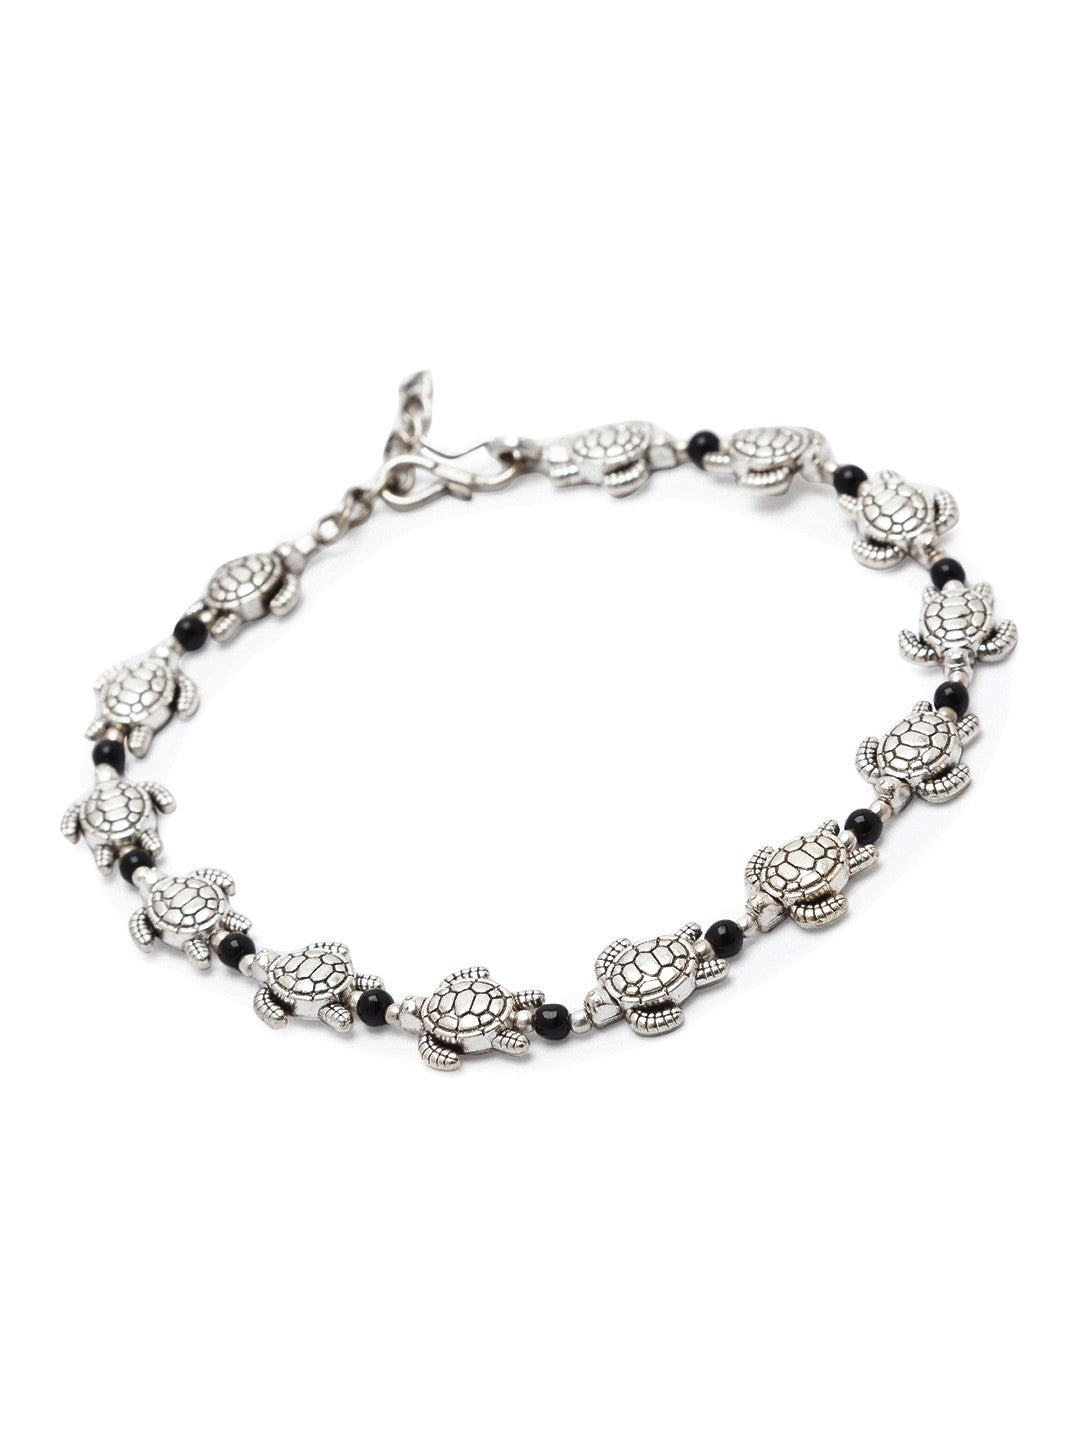 German Oxidised Silver Anklets Tortoise Payal Silver Plating Pazeb With Black beads Foot Jewellery